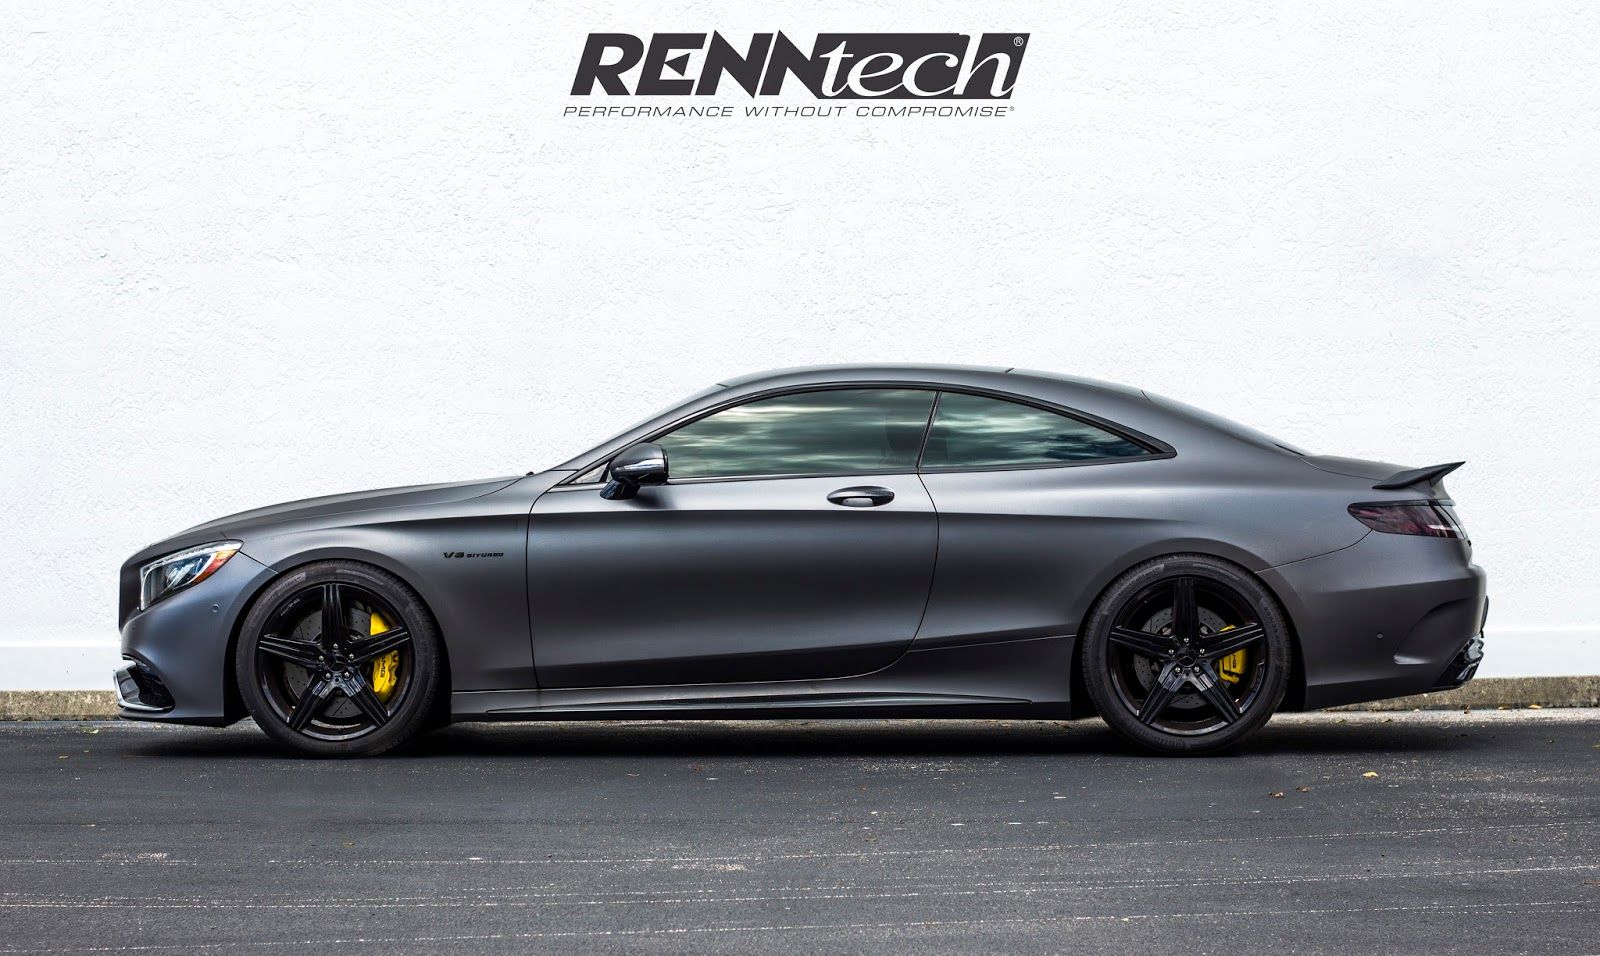 2016 Mercedes-AMG S63 Coupe by Renntech